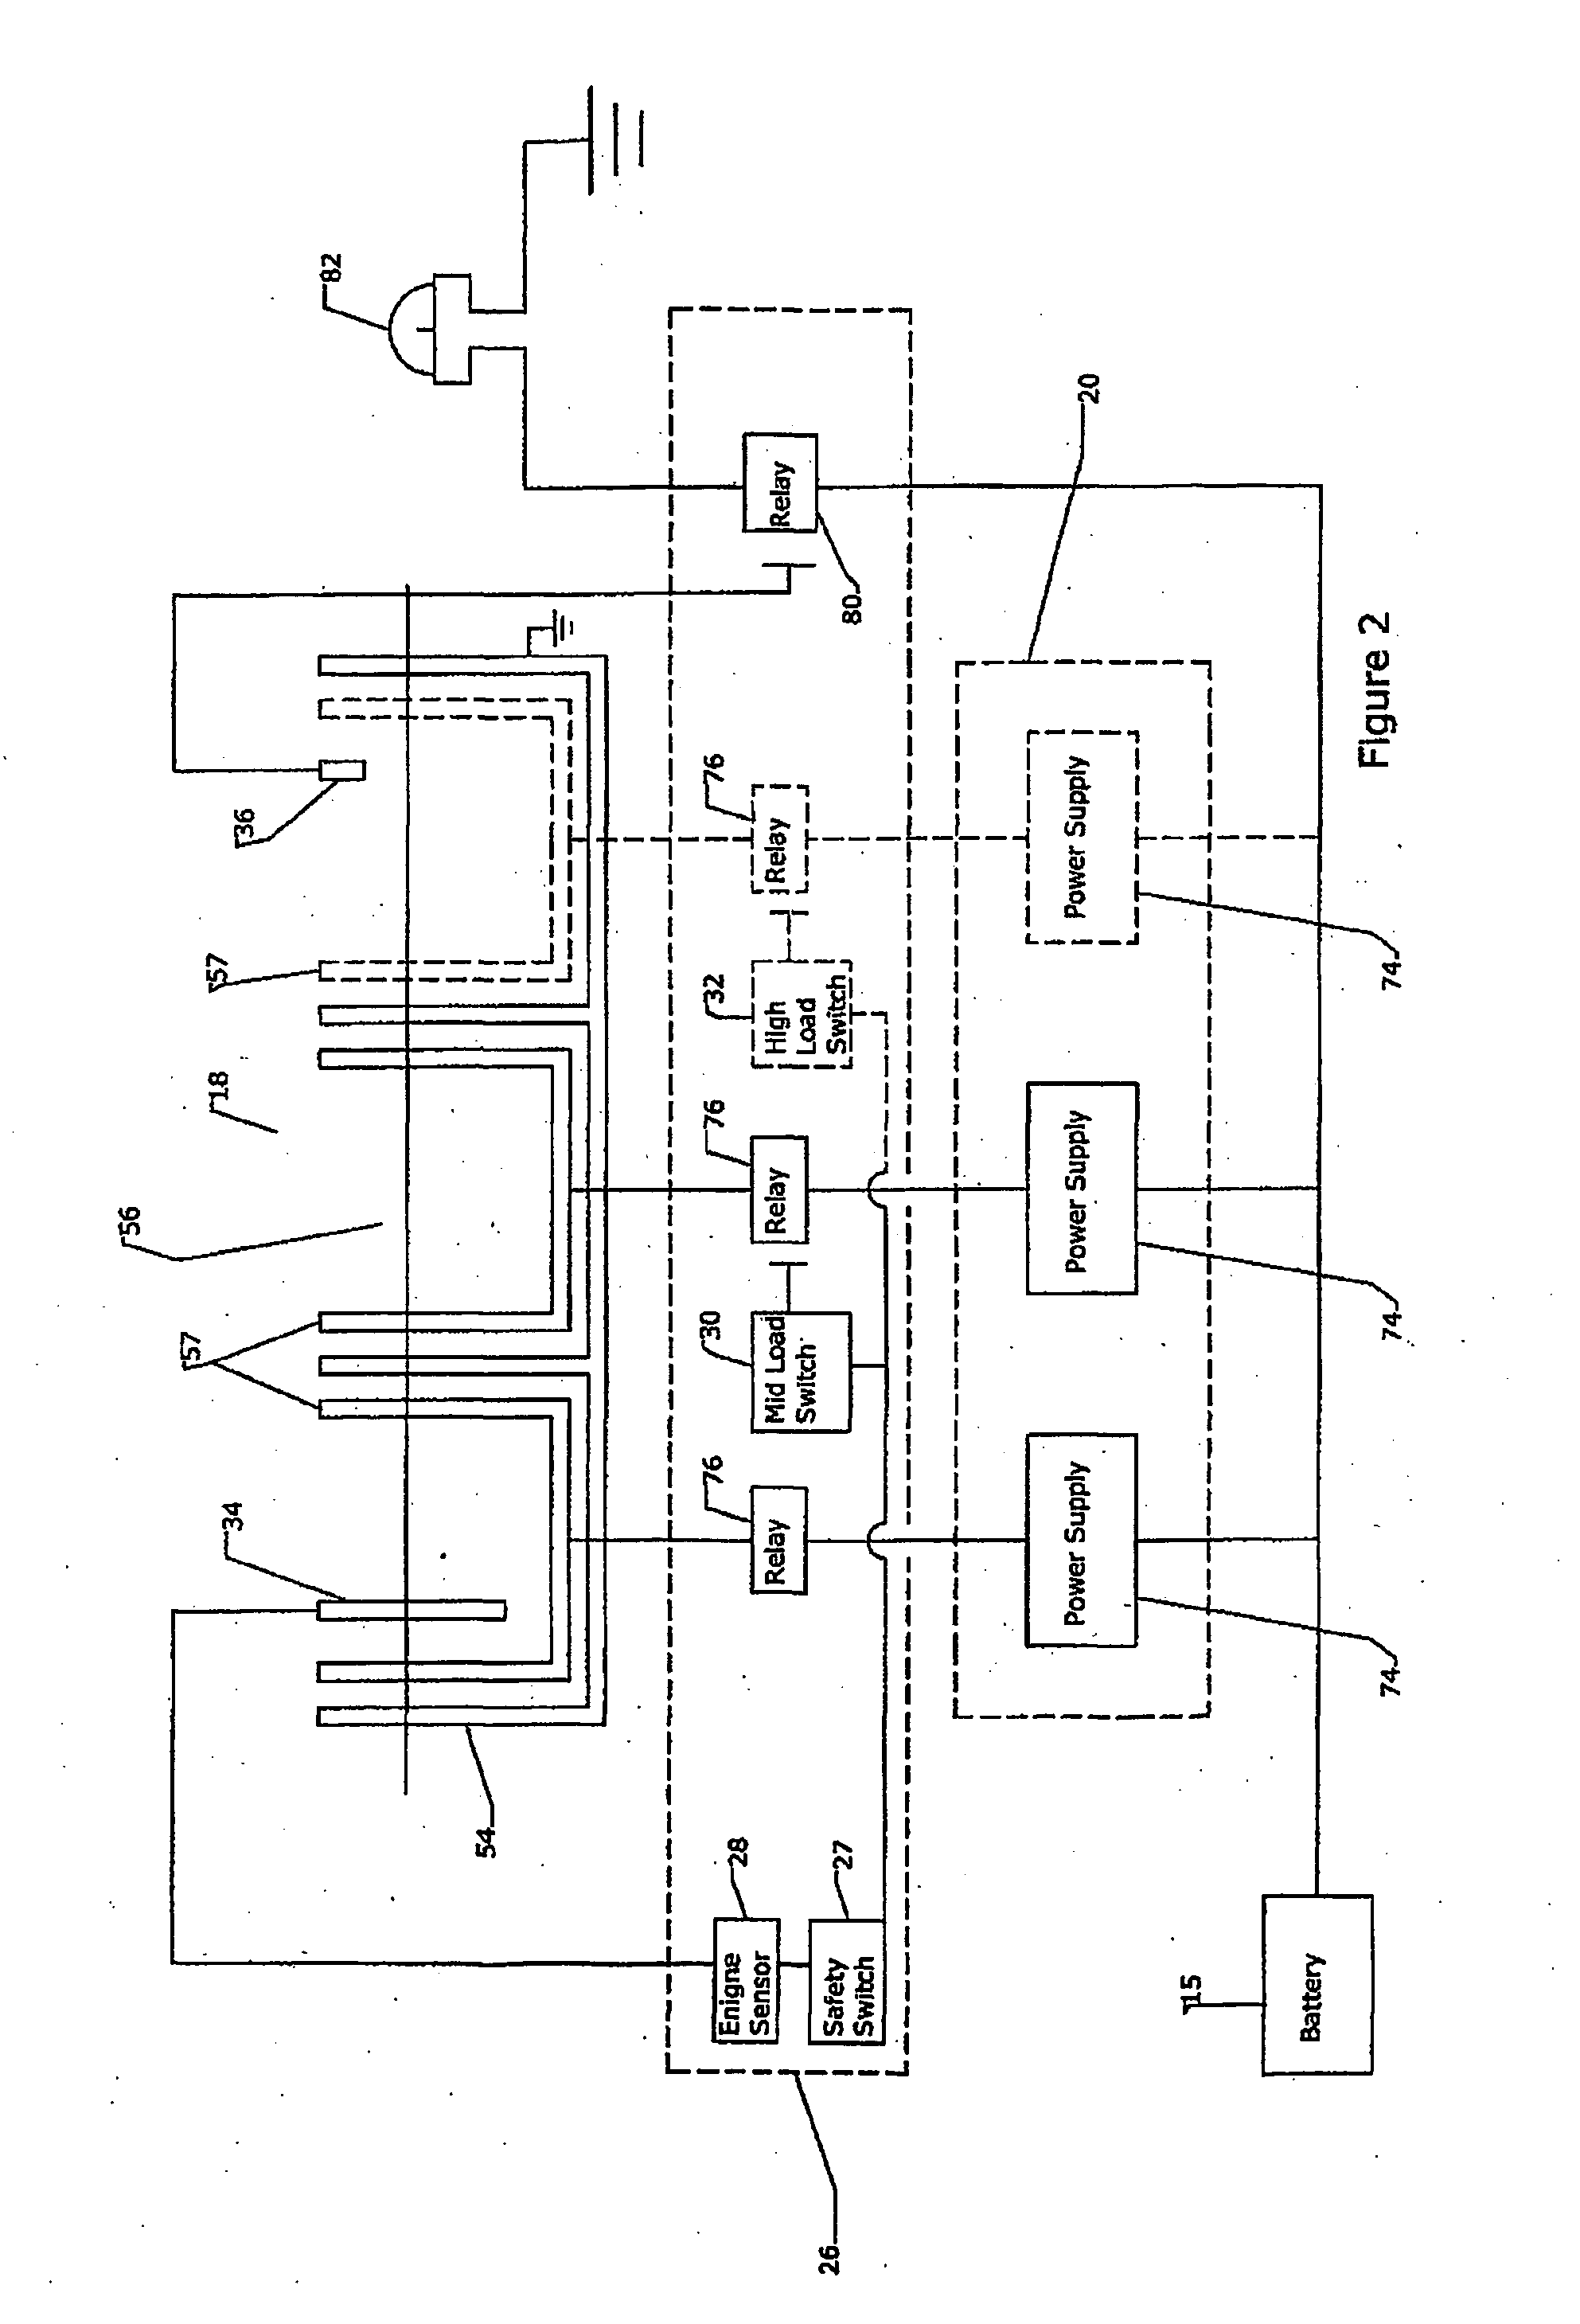 Electrolytic Cell for an Internal Combustion Engine